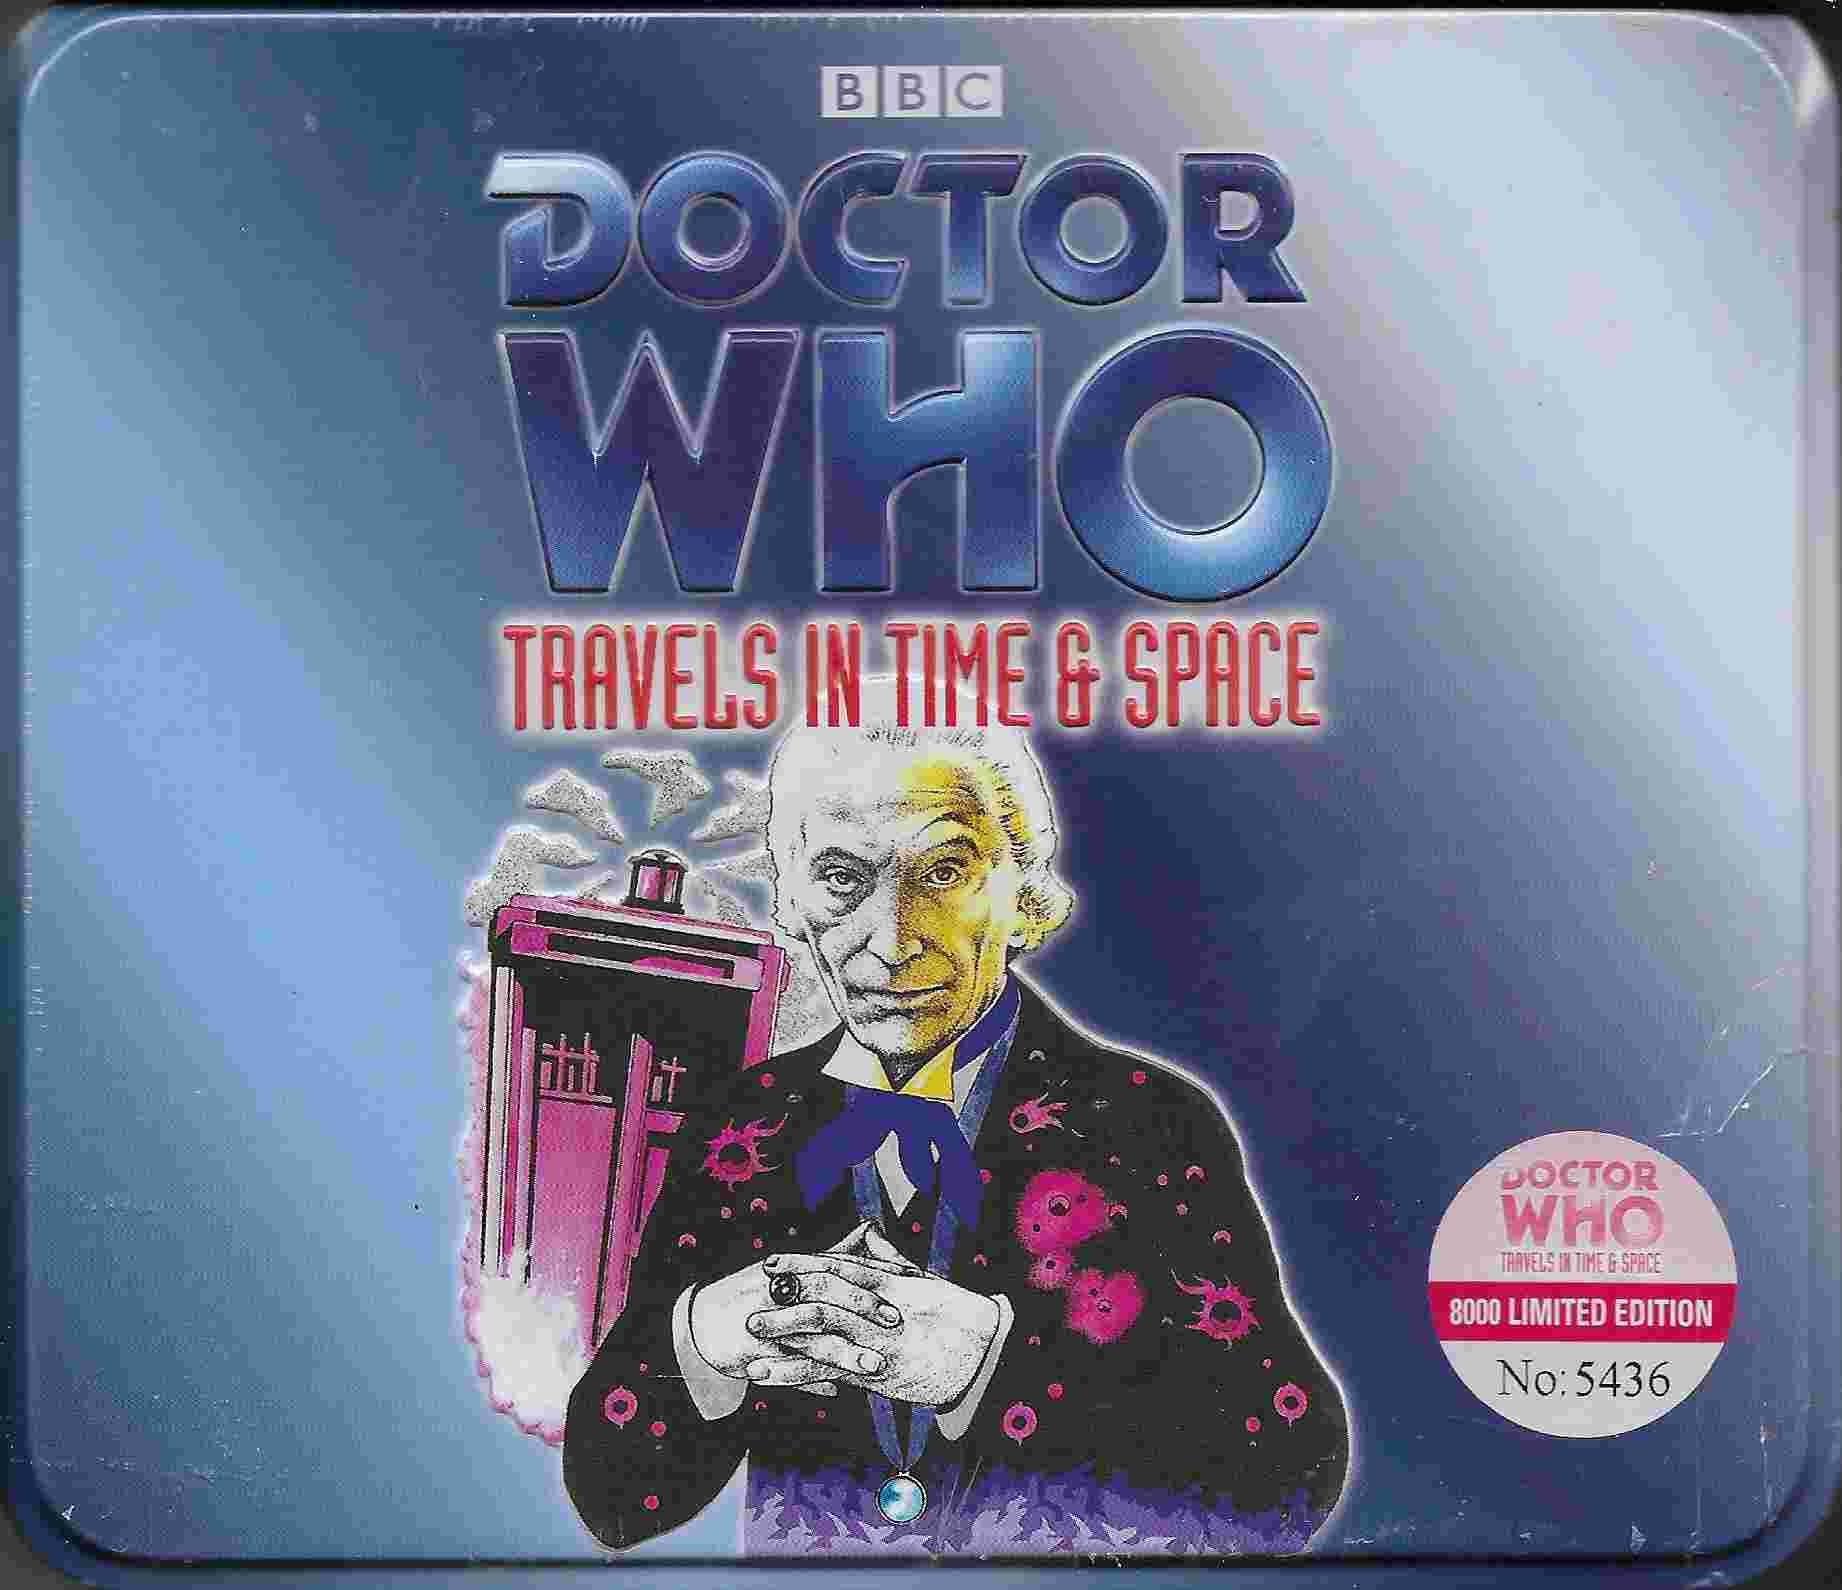 Picture of ISBN 0-563-50424-2 Doctor Who - Travels in time & space by artist David Whitaker / BillStrutton from the BBC cds - Records and Tapes library